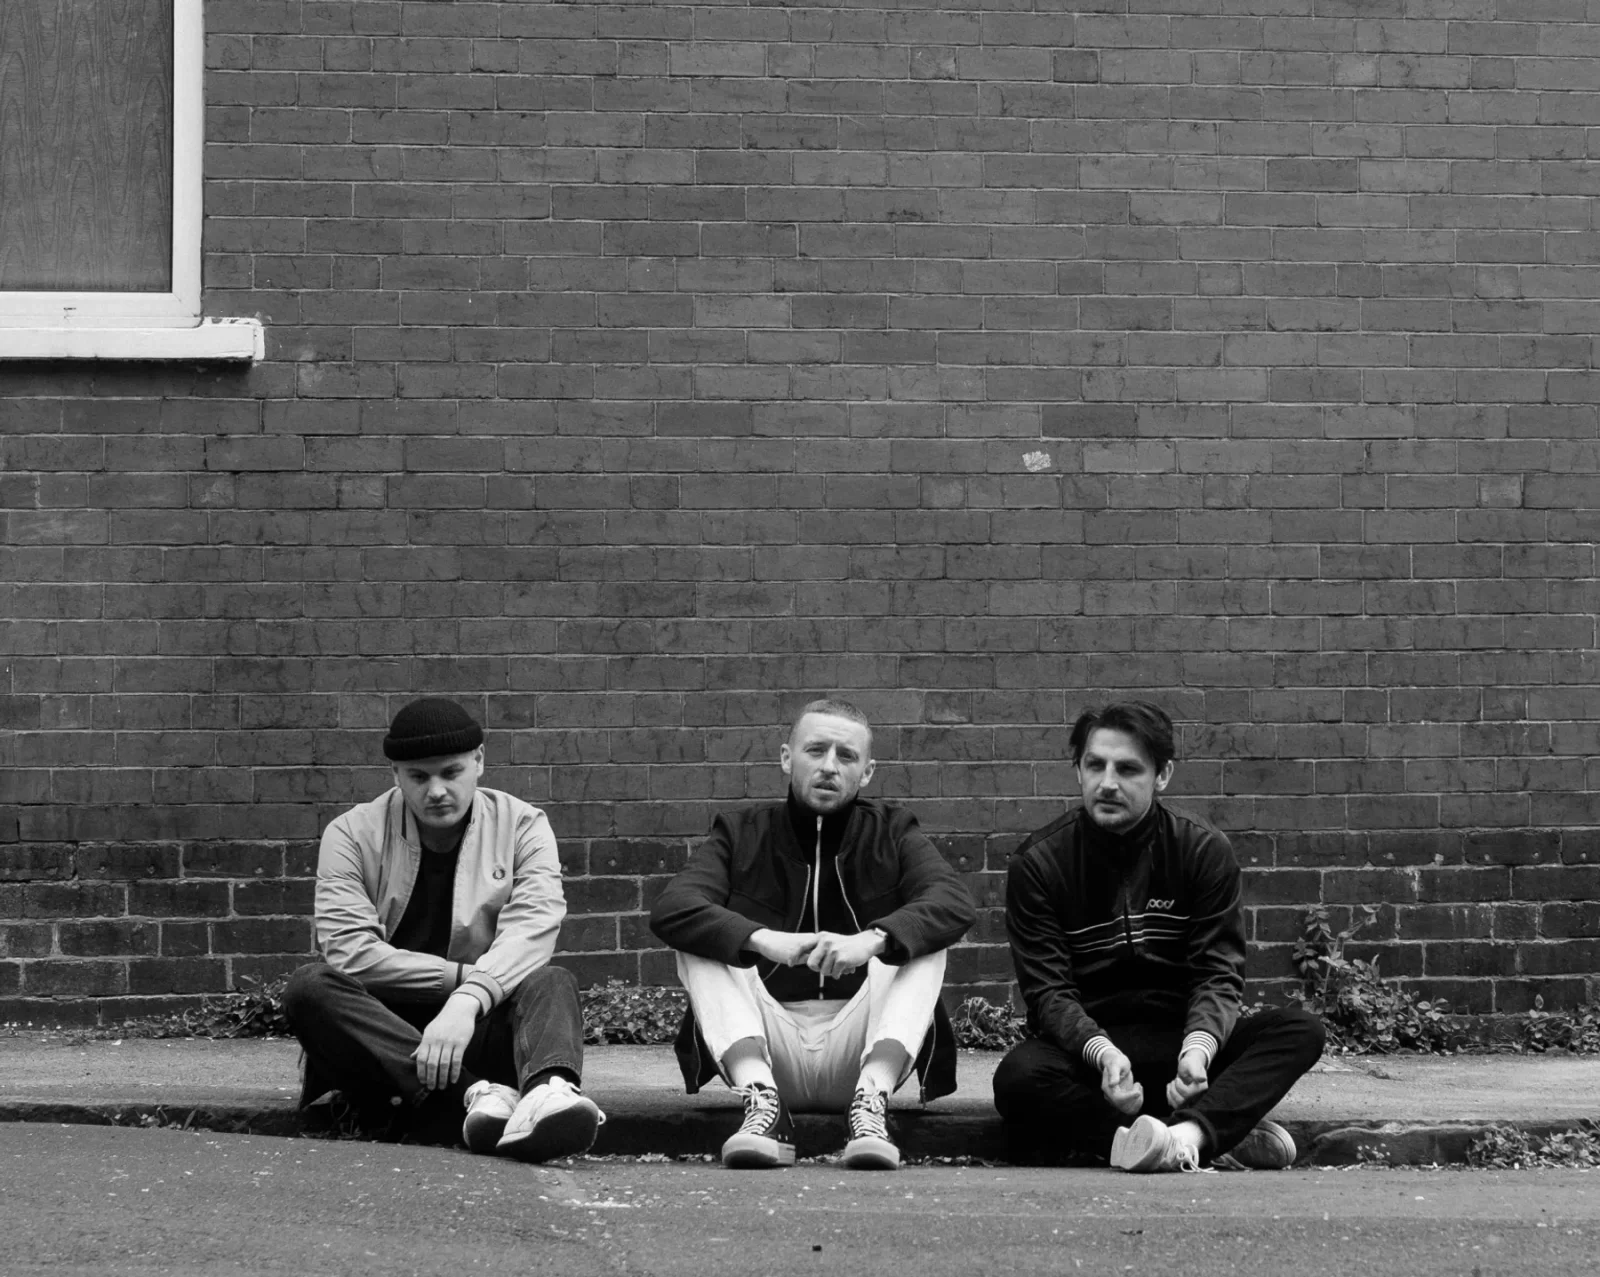 Skinny living band - The three band mates sat on a curb black and whitee picture